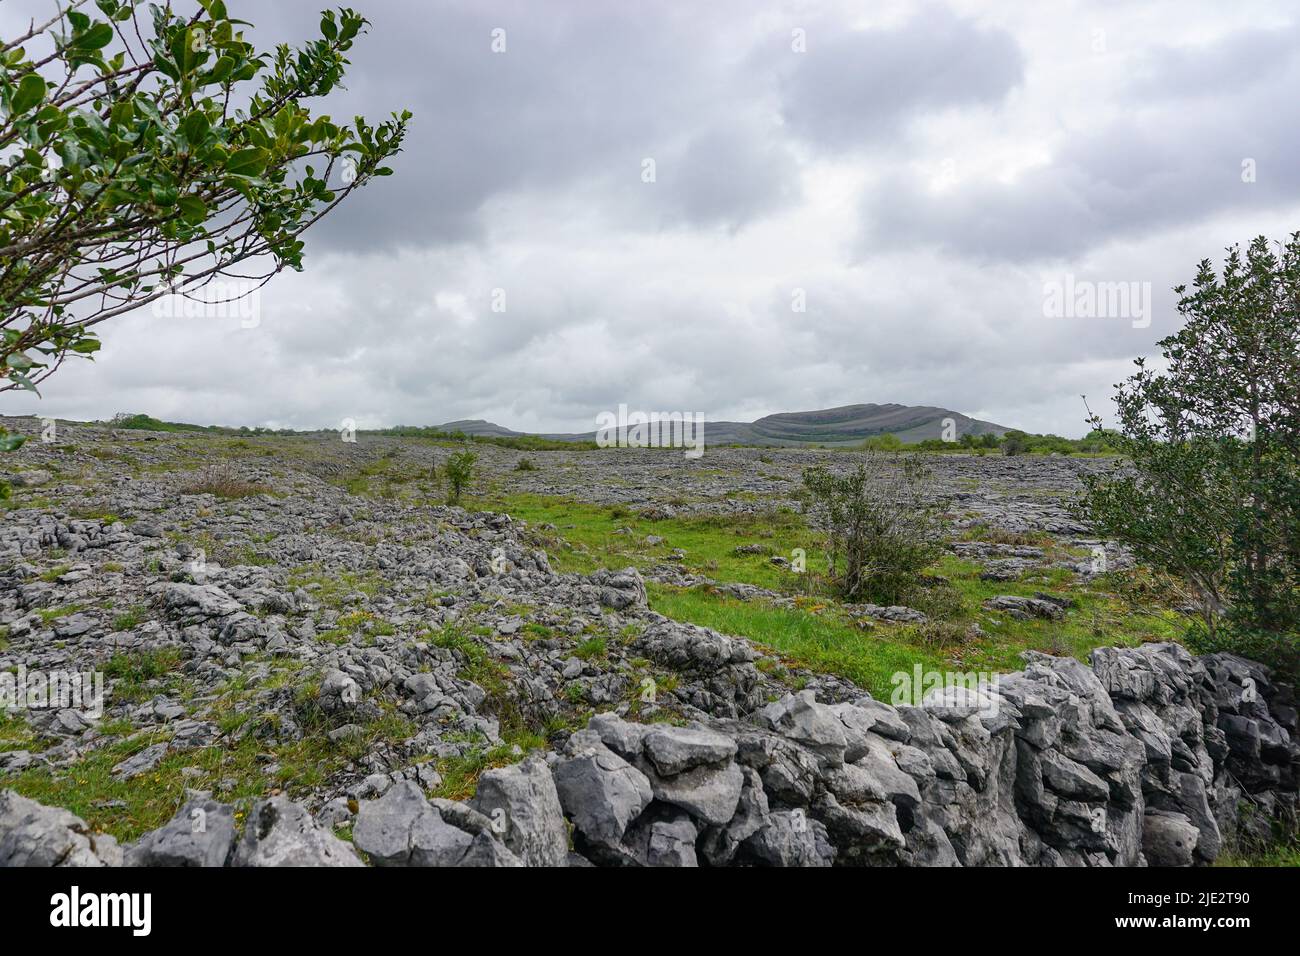 Burren National Park, Co. Clare, Ireland: View of Mullaghmore Hill from the Burren (“rocky place”), one of the largest karst limestone areas in Europe. Stock Photo